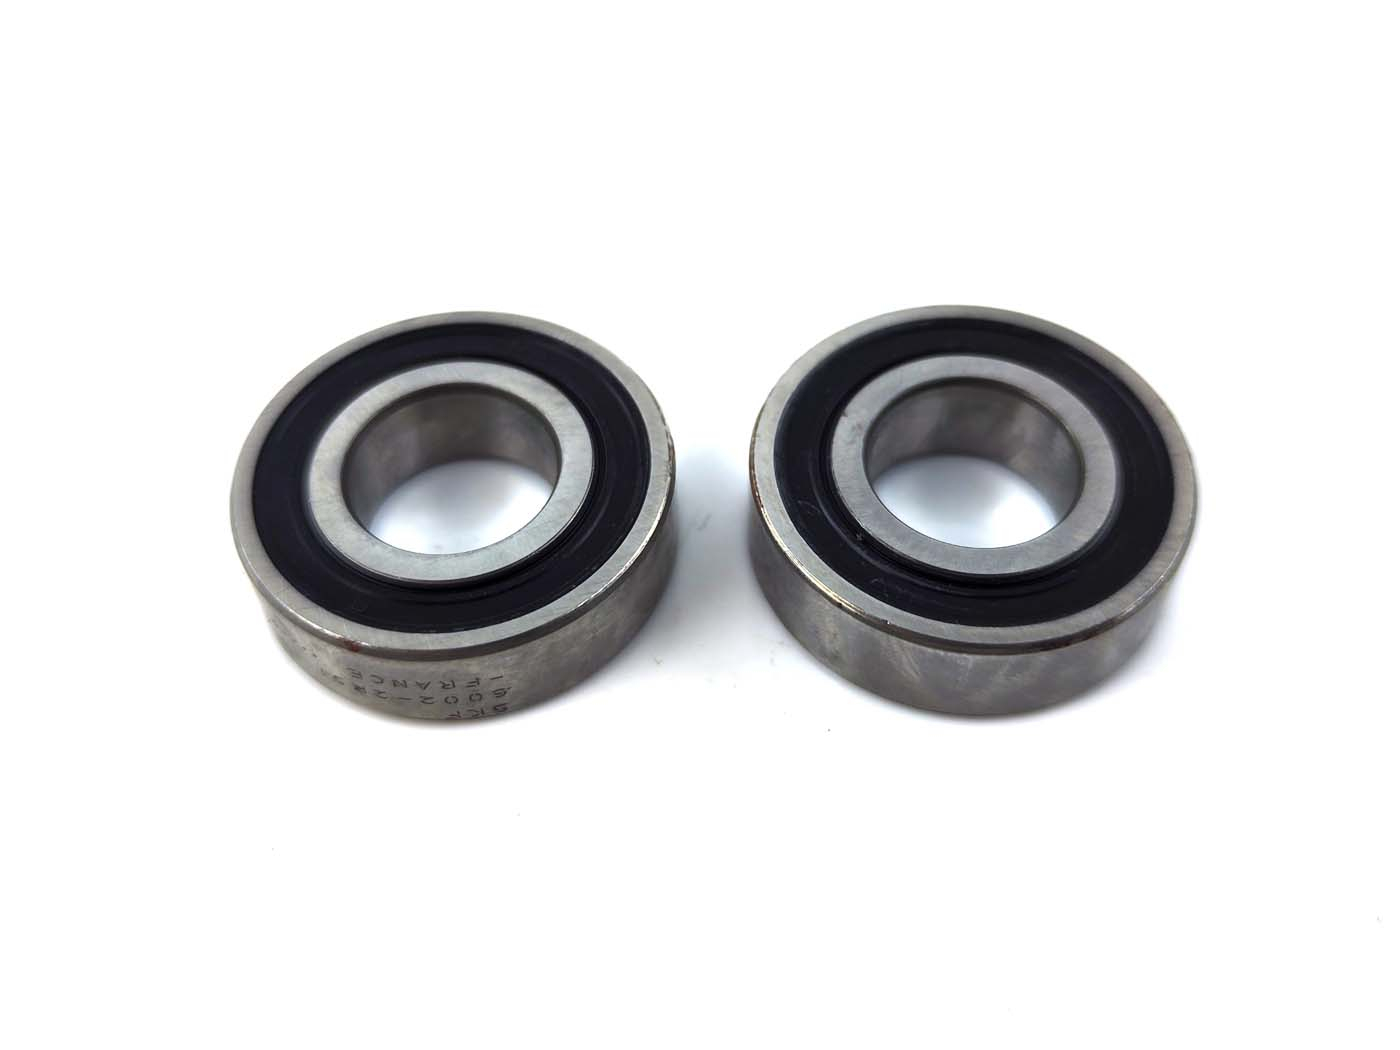 Wiellager  Set SKF 2 Stuks voor Puch VS, Puch DS, Puch DZ